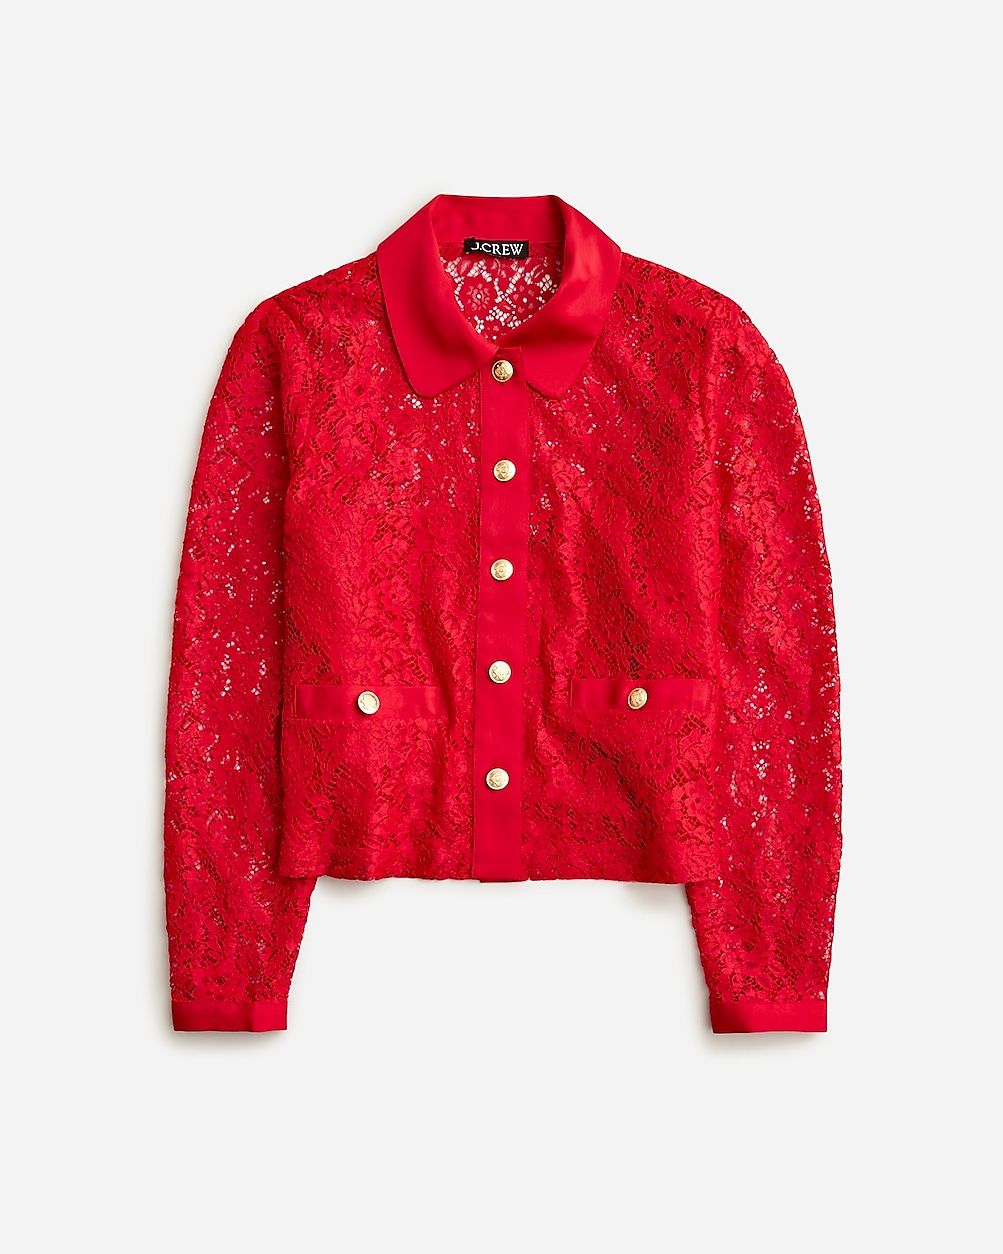 Lady shirt-jacket in lace | J.Crew US